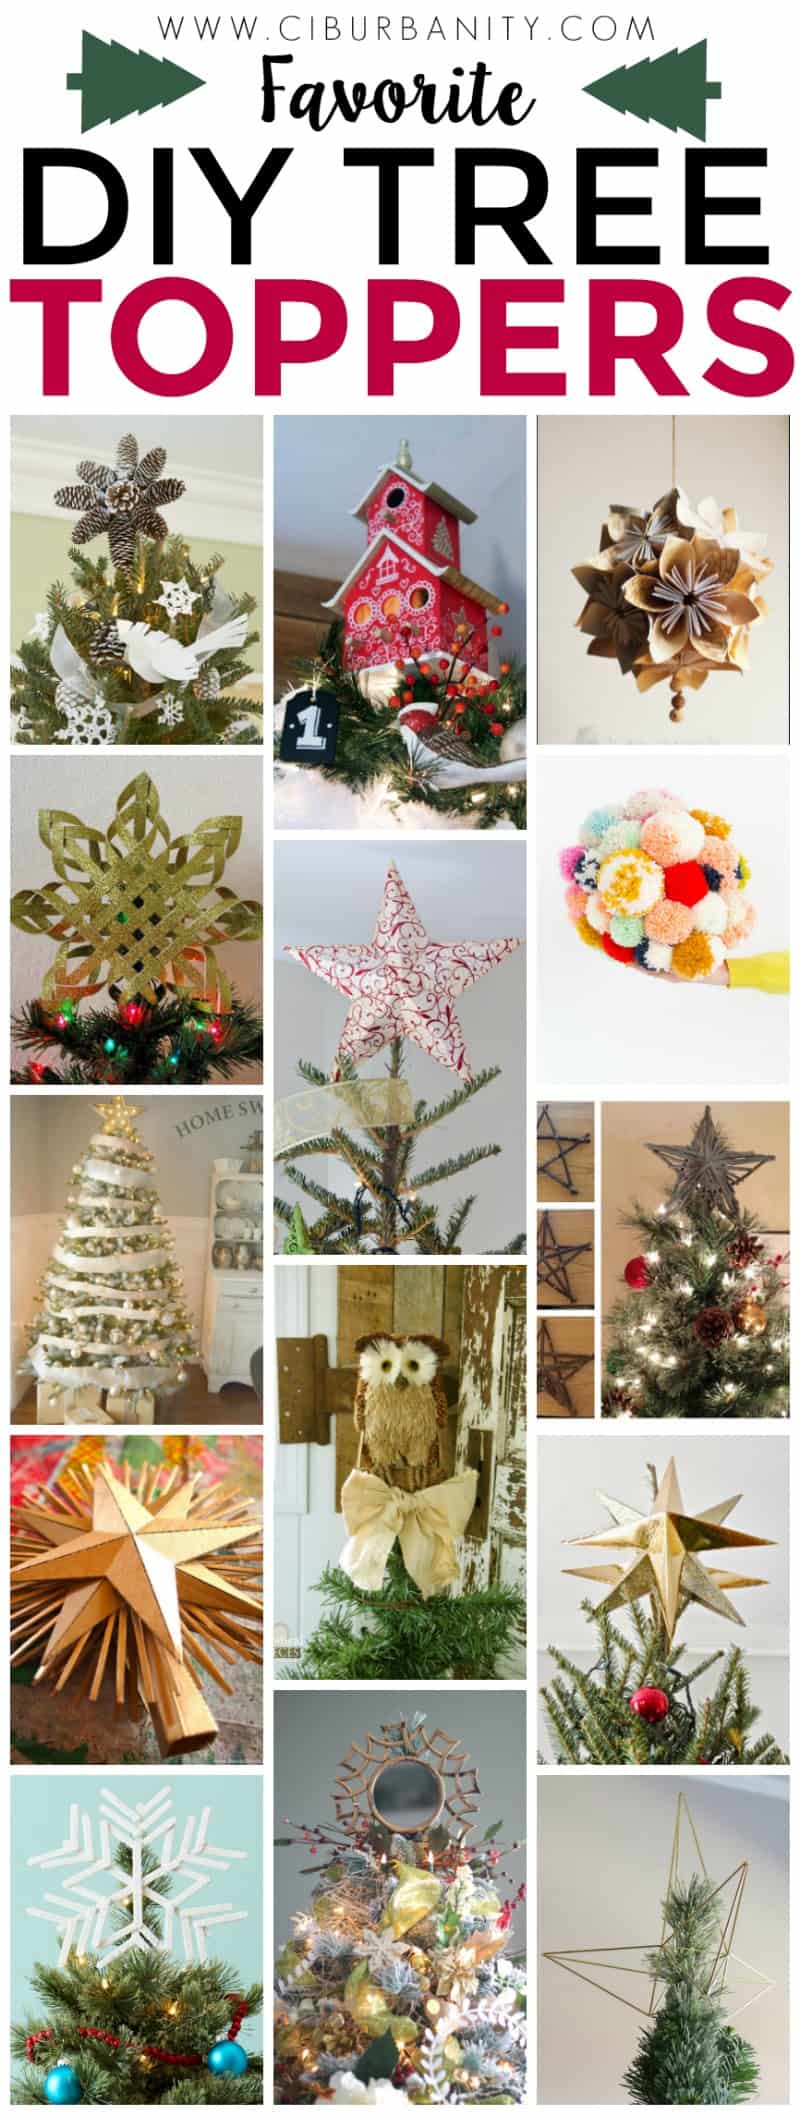 Great list of DIY tree toppers... I'm going to have to try these!